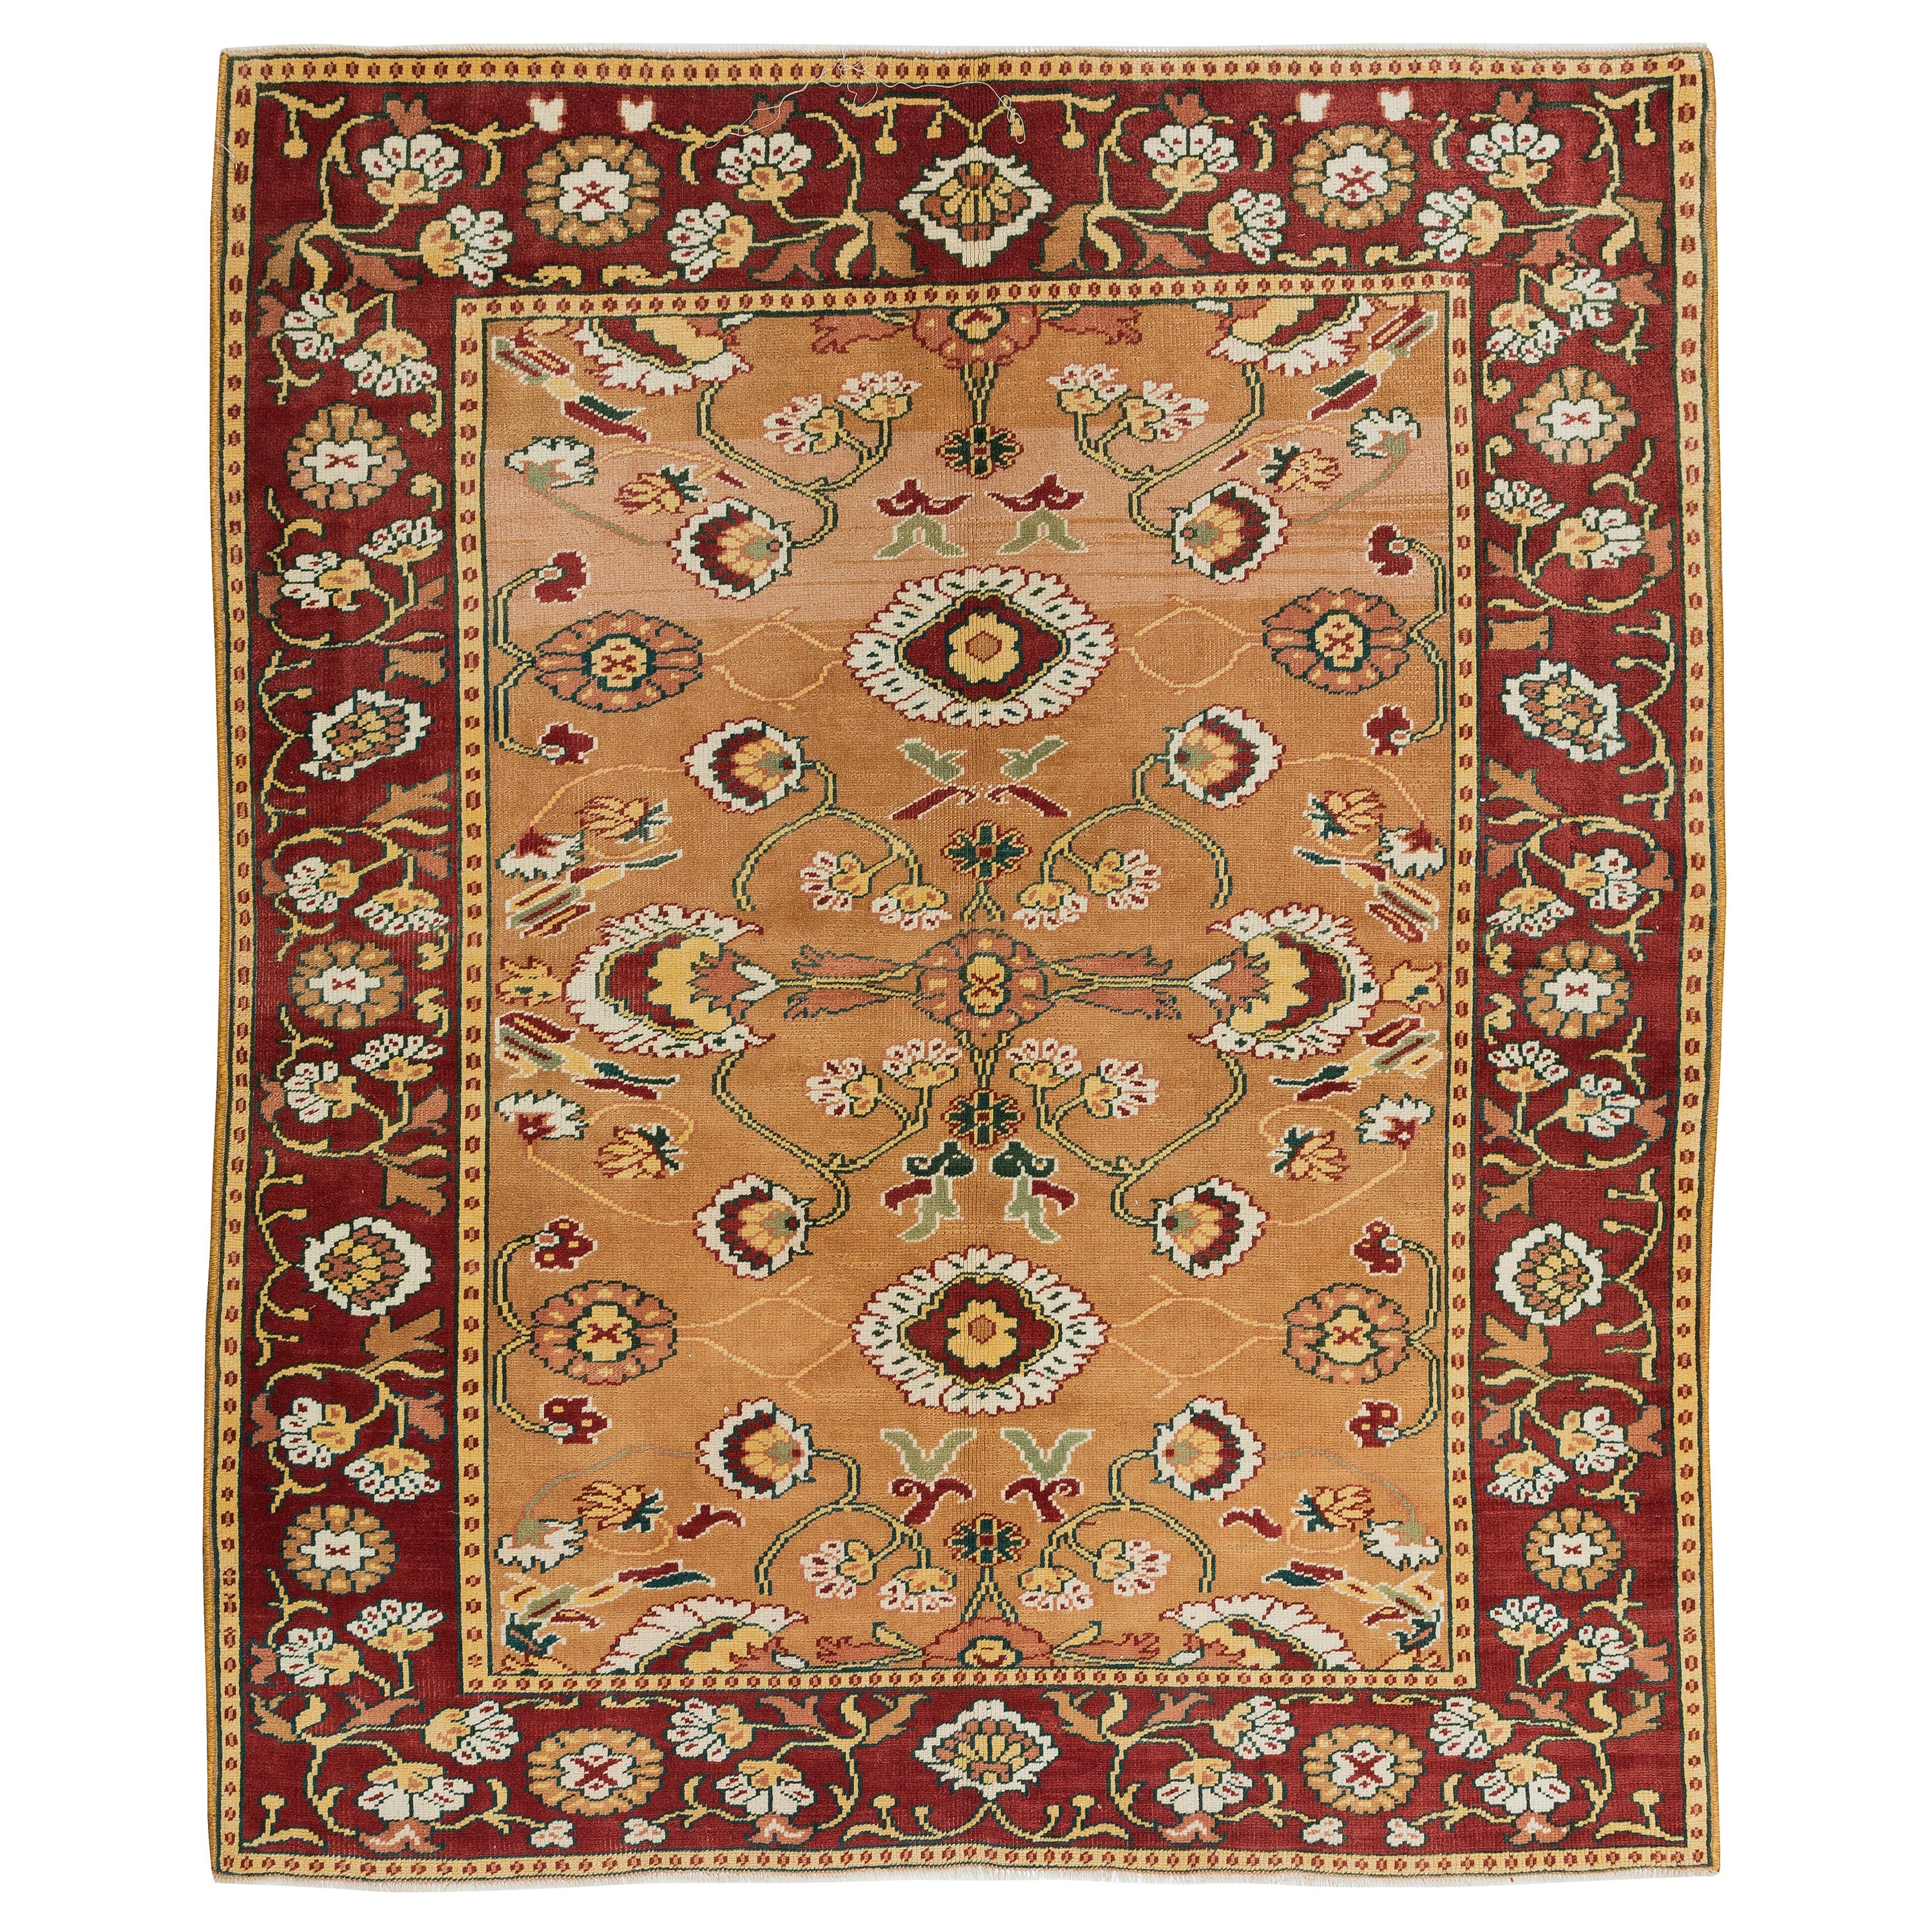 4.6x5.5 Ft Modern Turkish Rug with Floral Design, Contemporary Handmade Carpet For Sale